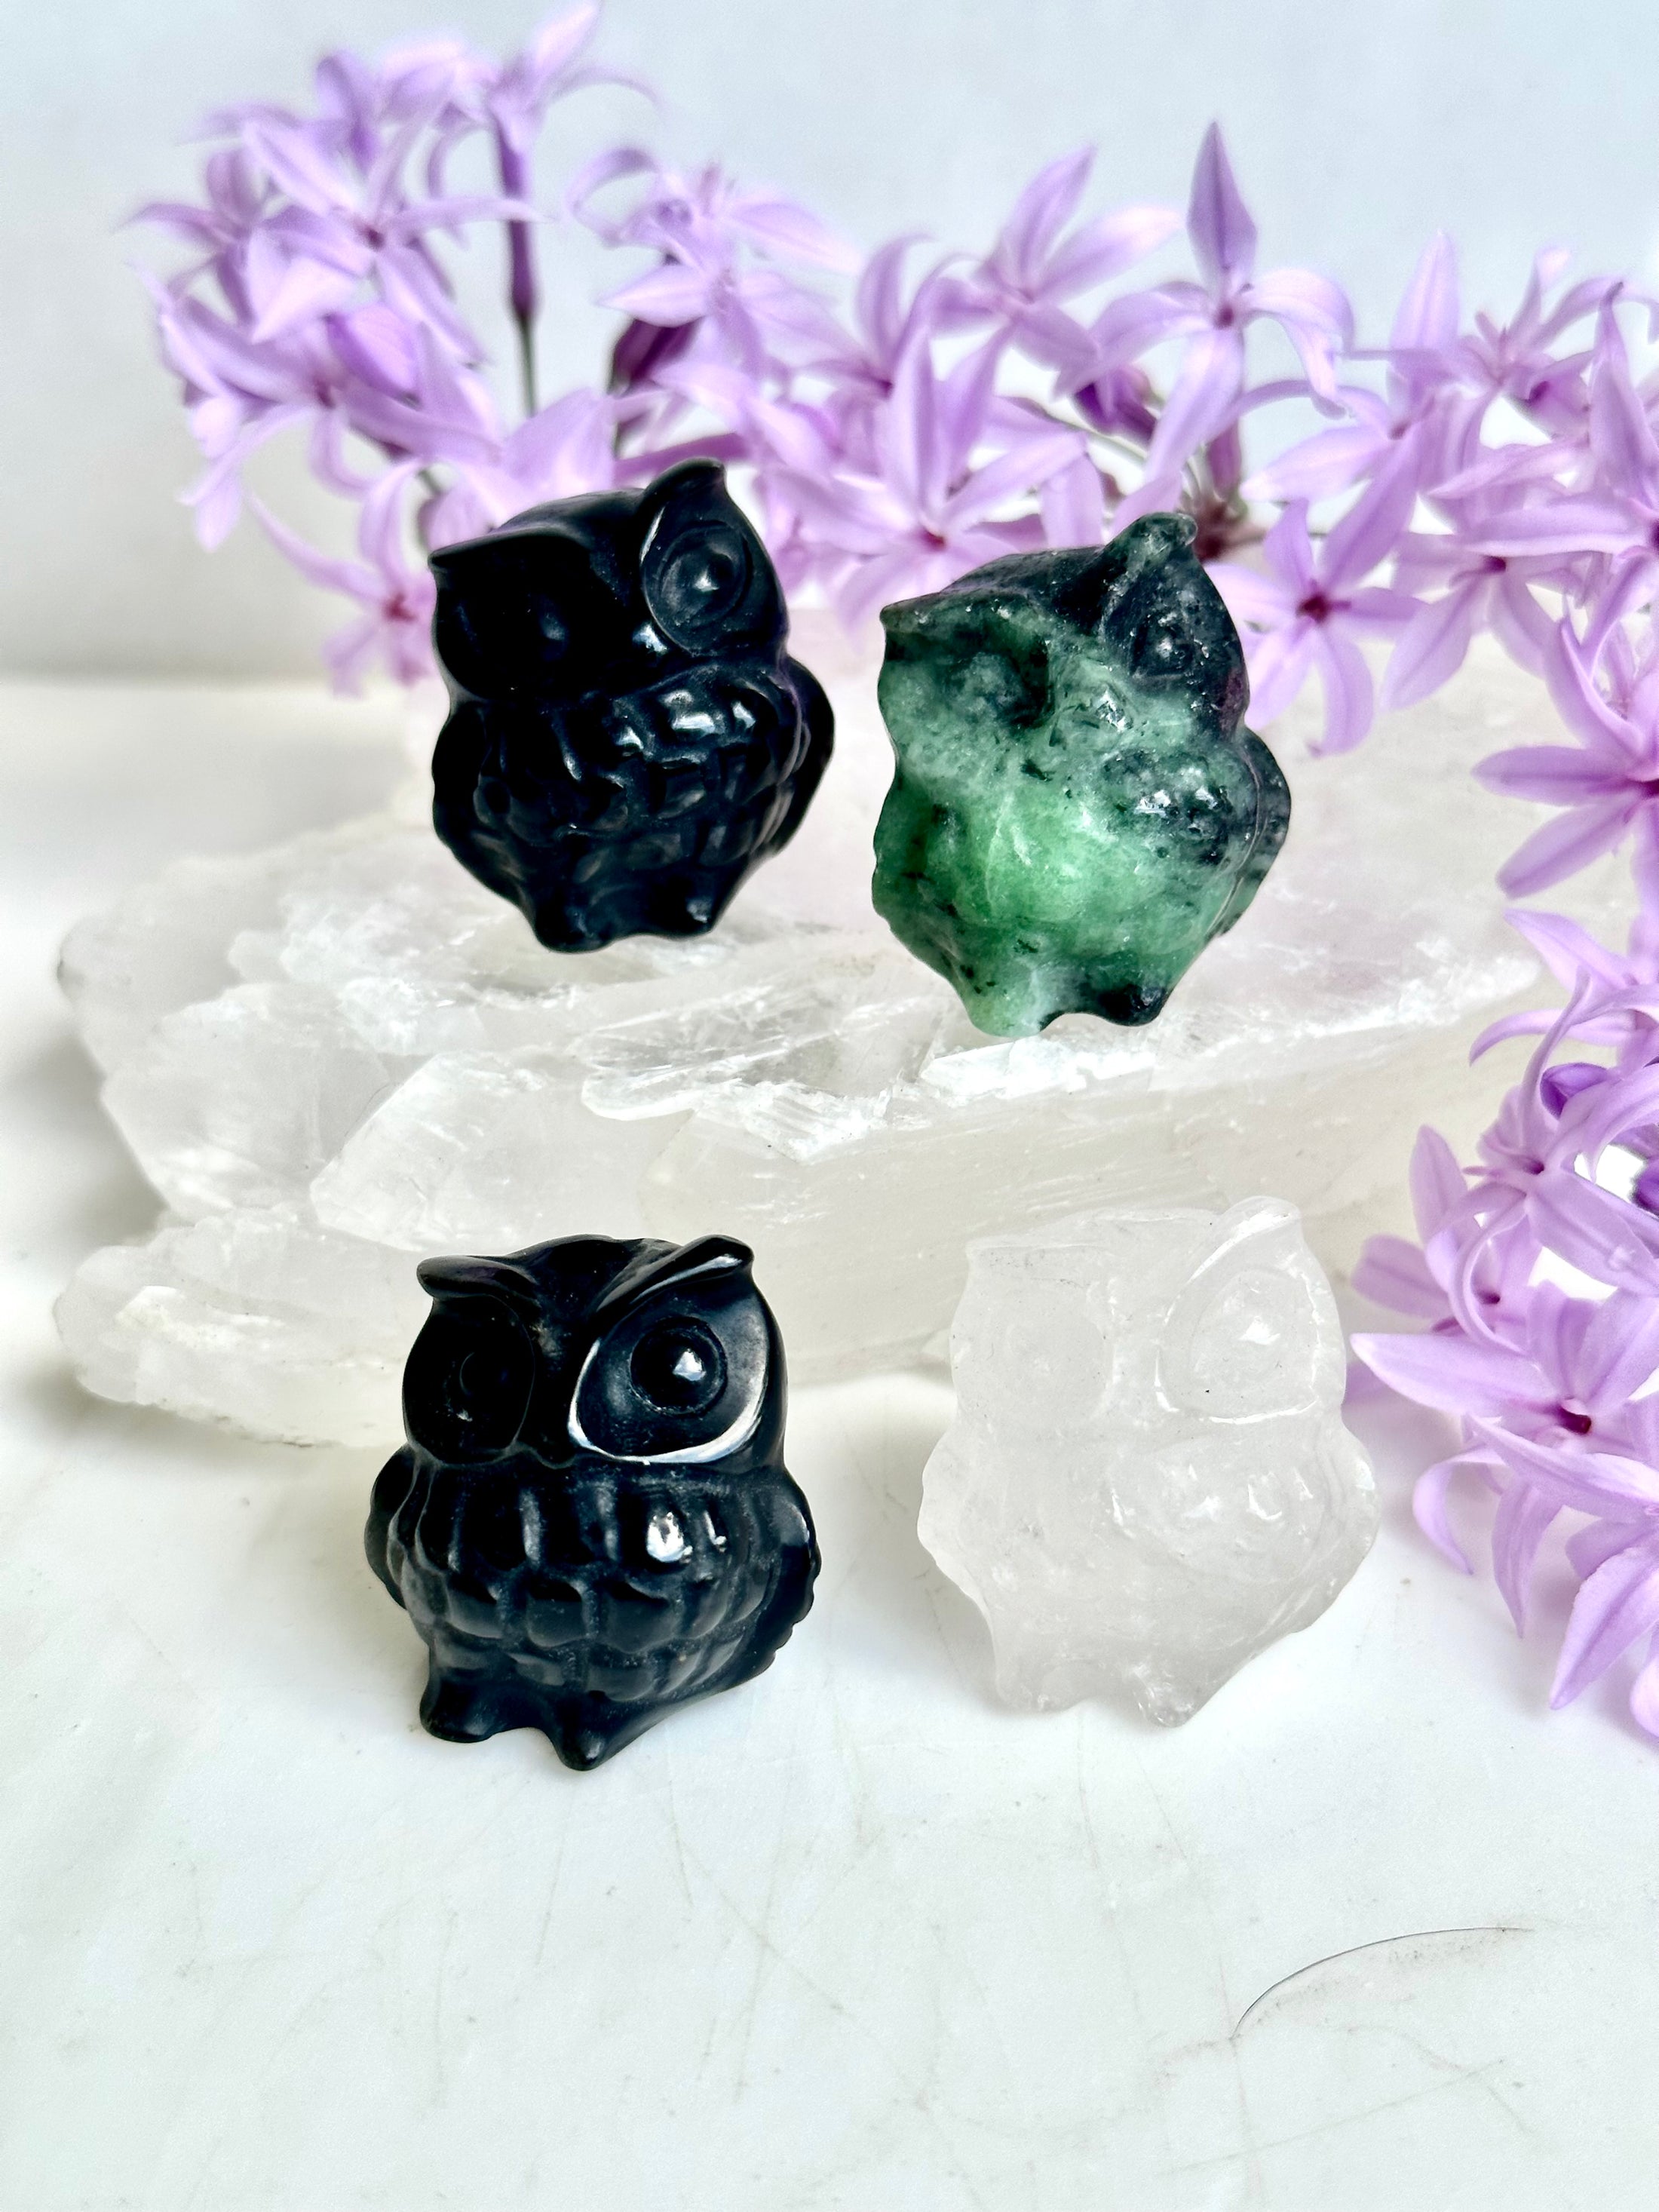 Puffy  Mini Crystal Owl Carvings- so adorable!